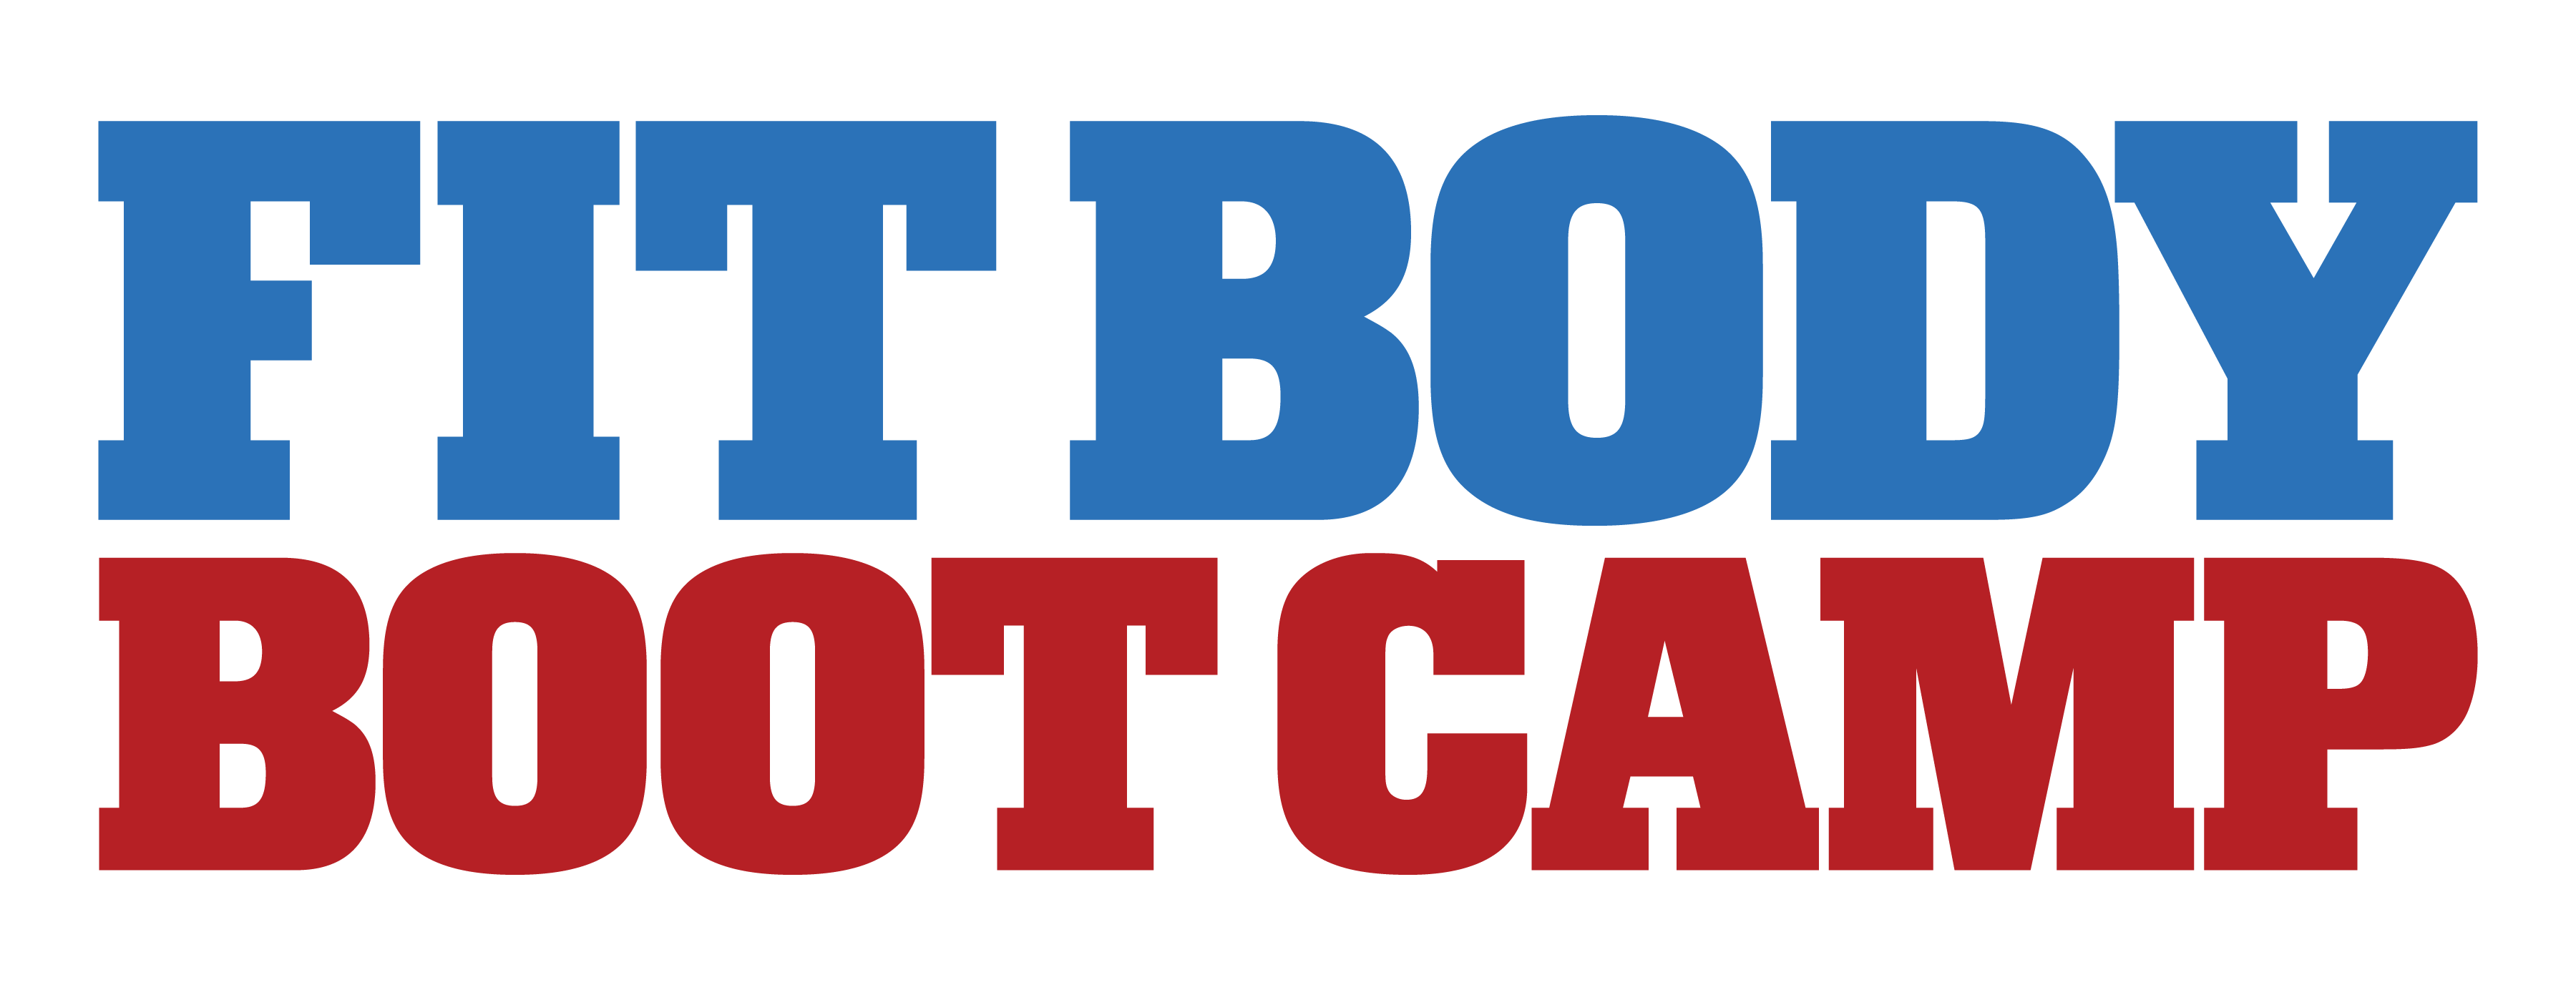 Boot Camp Logo - Fit Body Boot Camp Logo.png